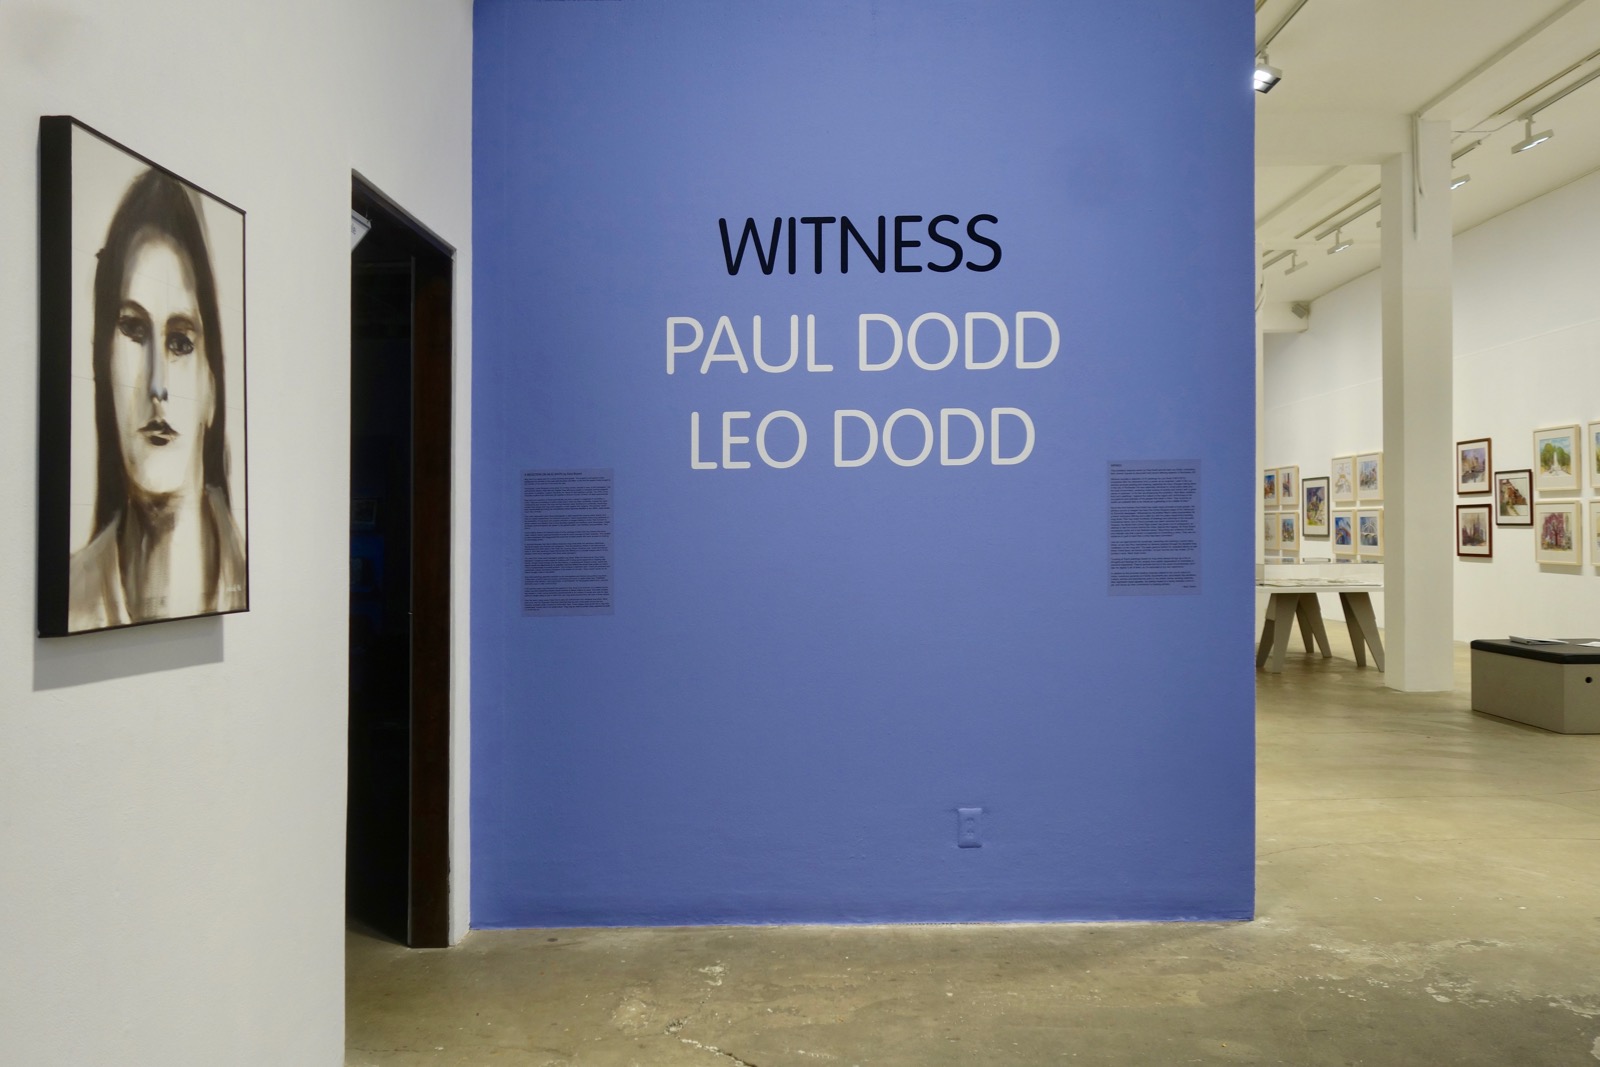 Installation view of "Witness - Paul Dodd, Leo Dodd" at Rochester Contemporary 2017